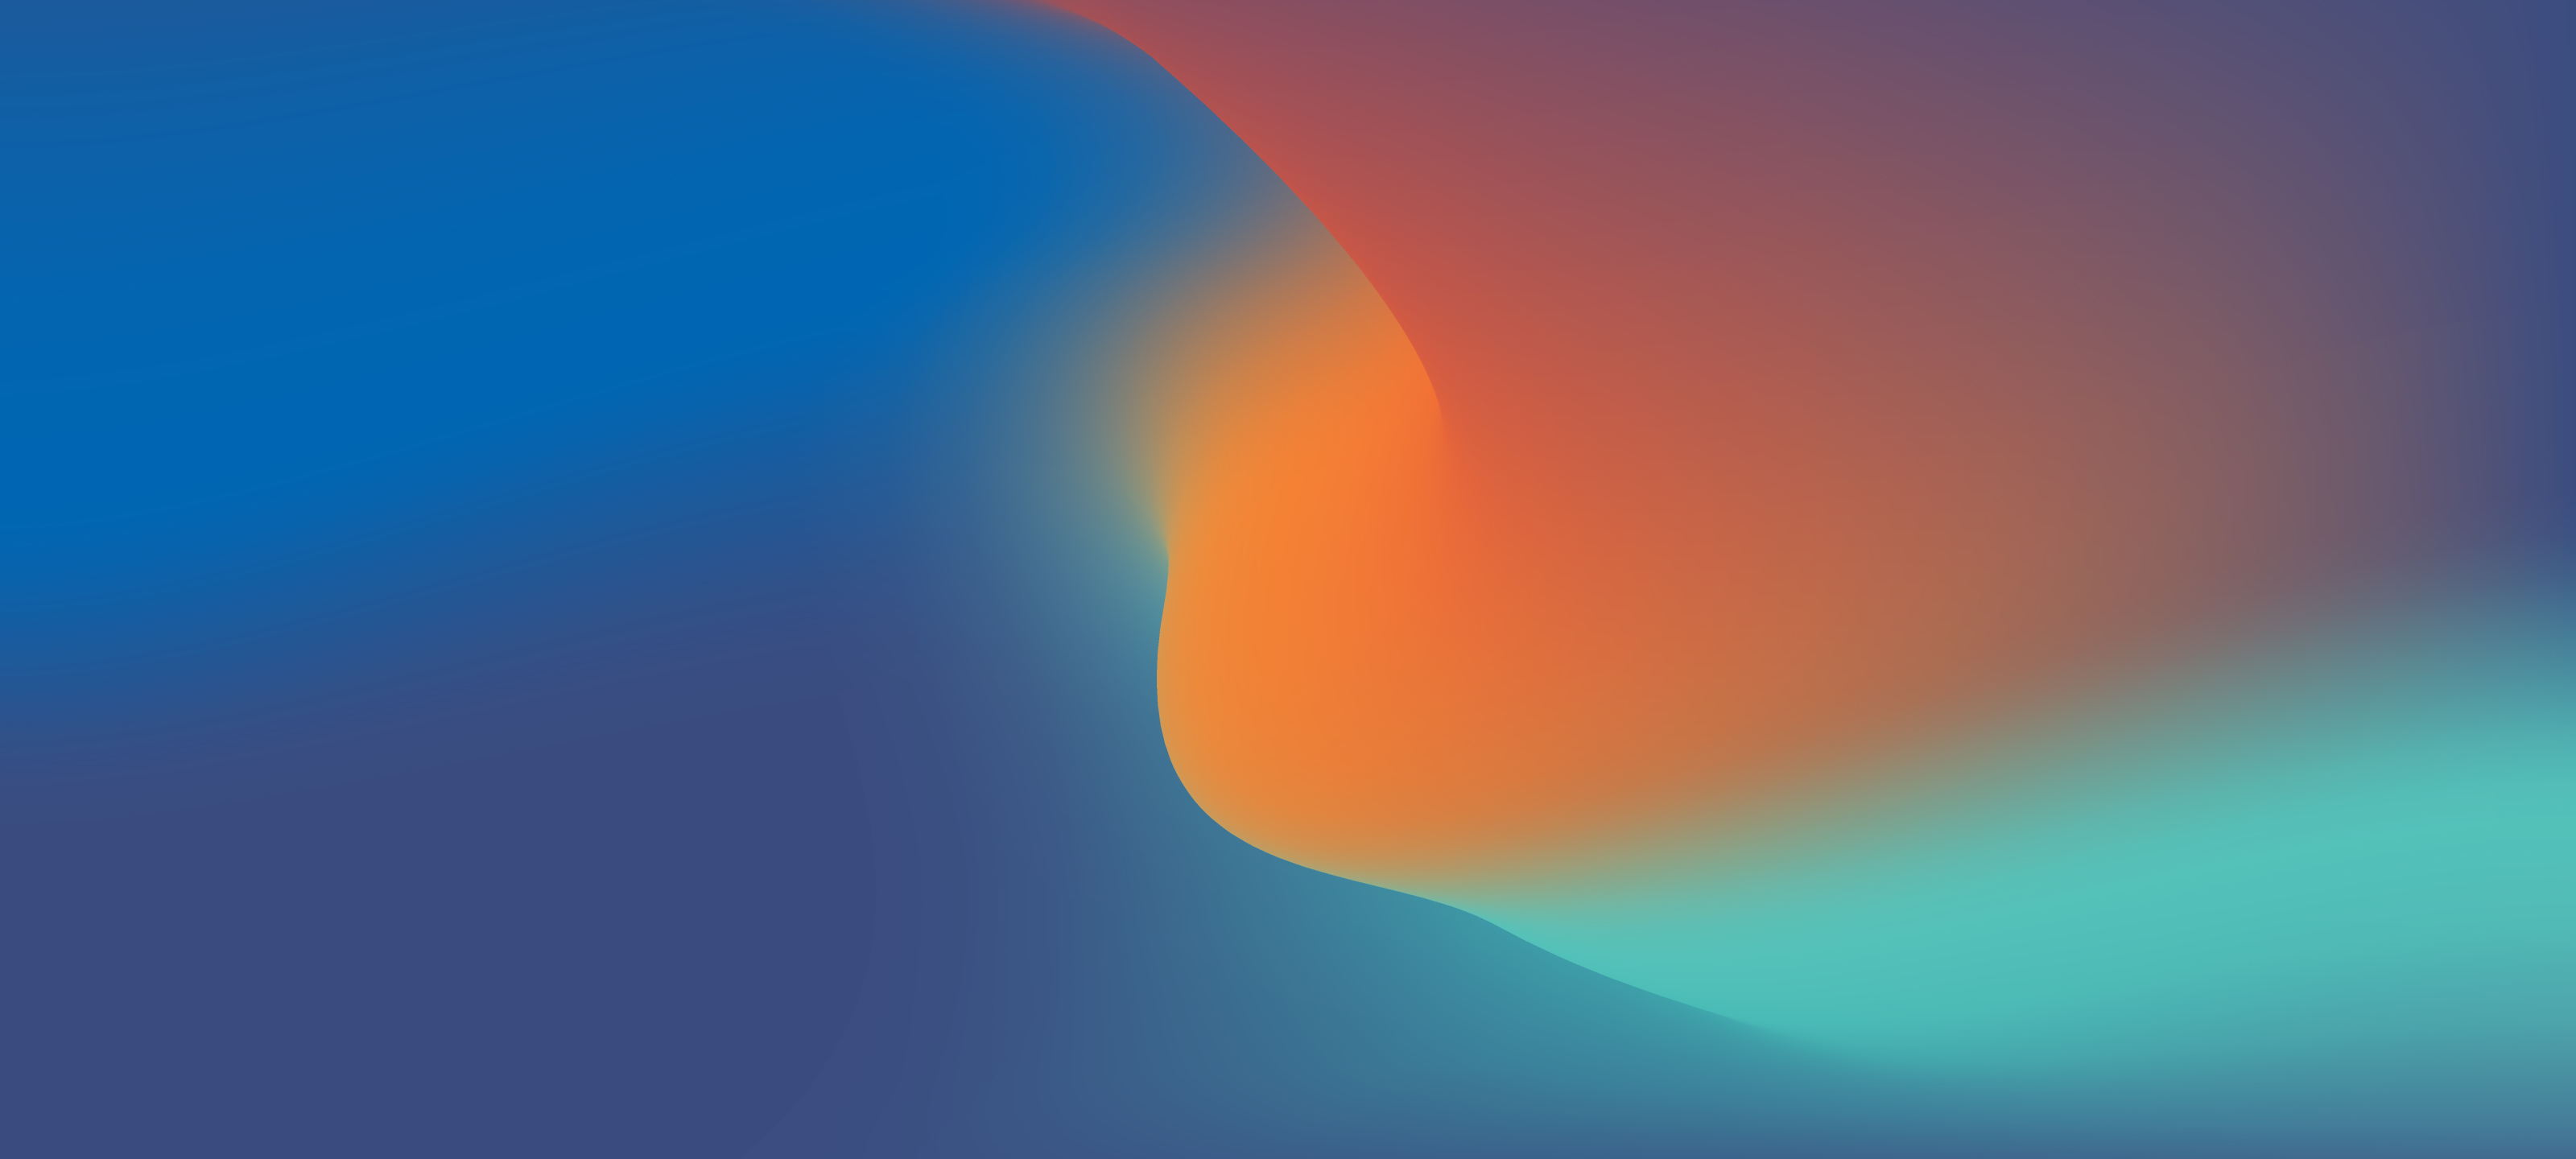 3200x1440 Resolution Abstract Colors 8k Gradient Art 3200x1440 ...